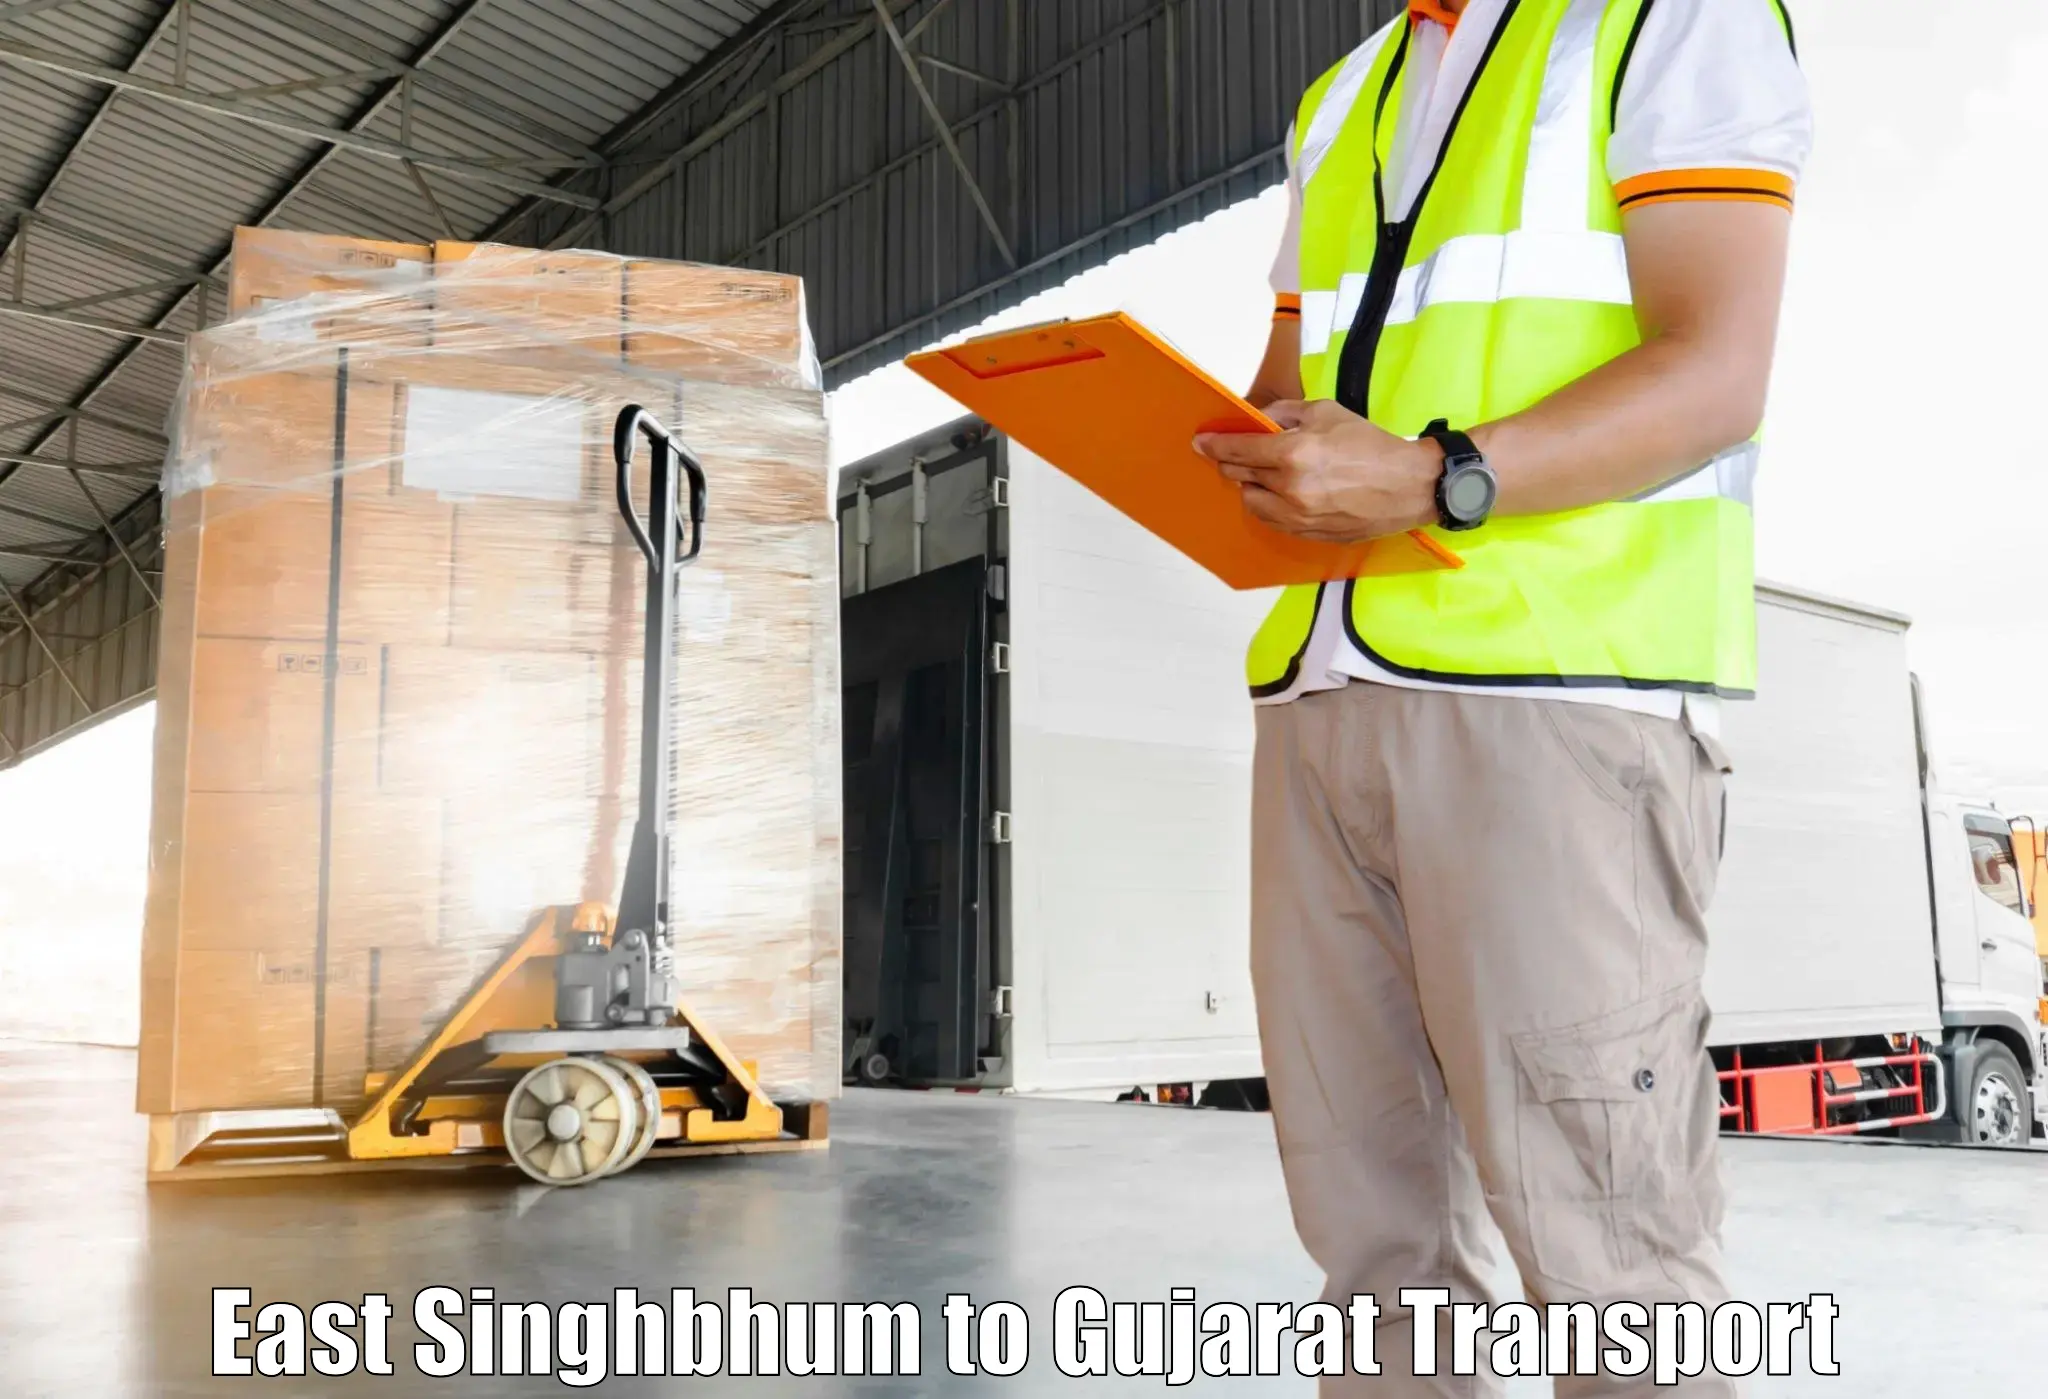 Air freight transport services in East Singhbhum to Hazira